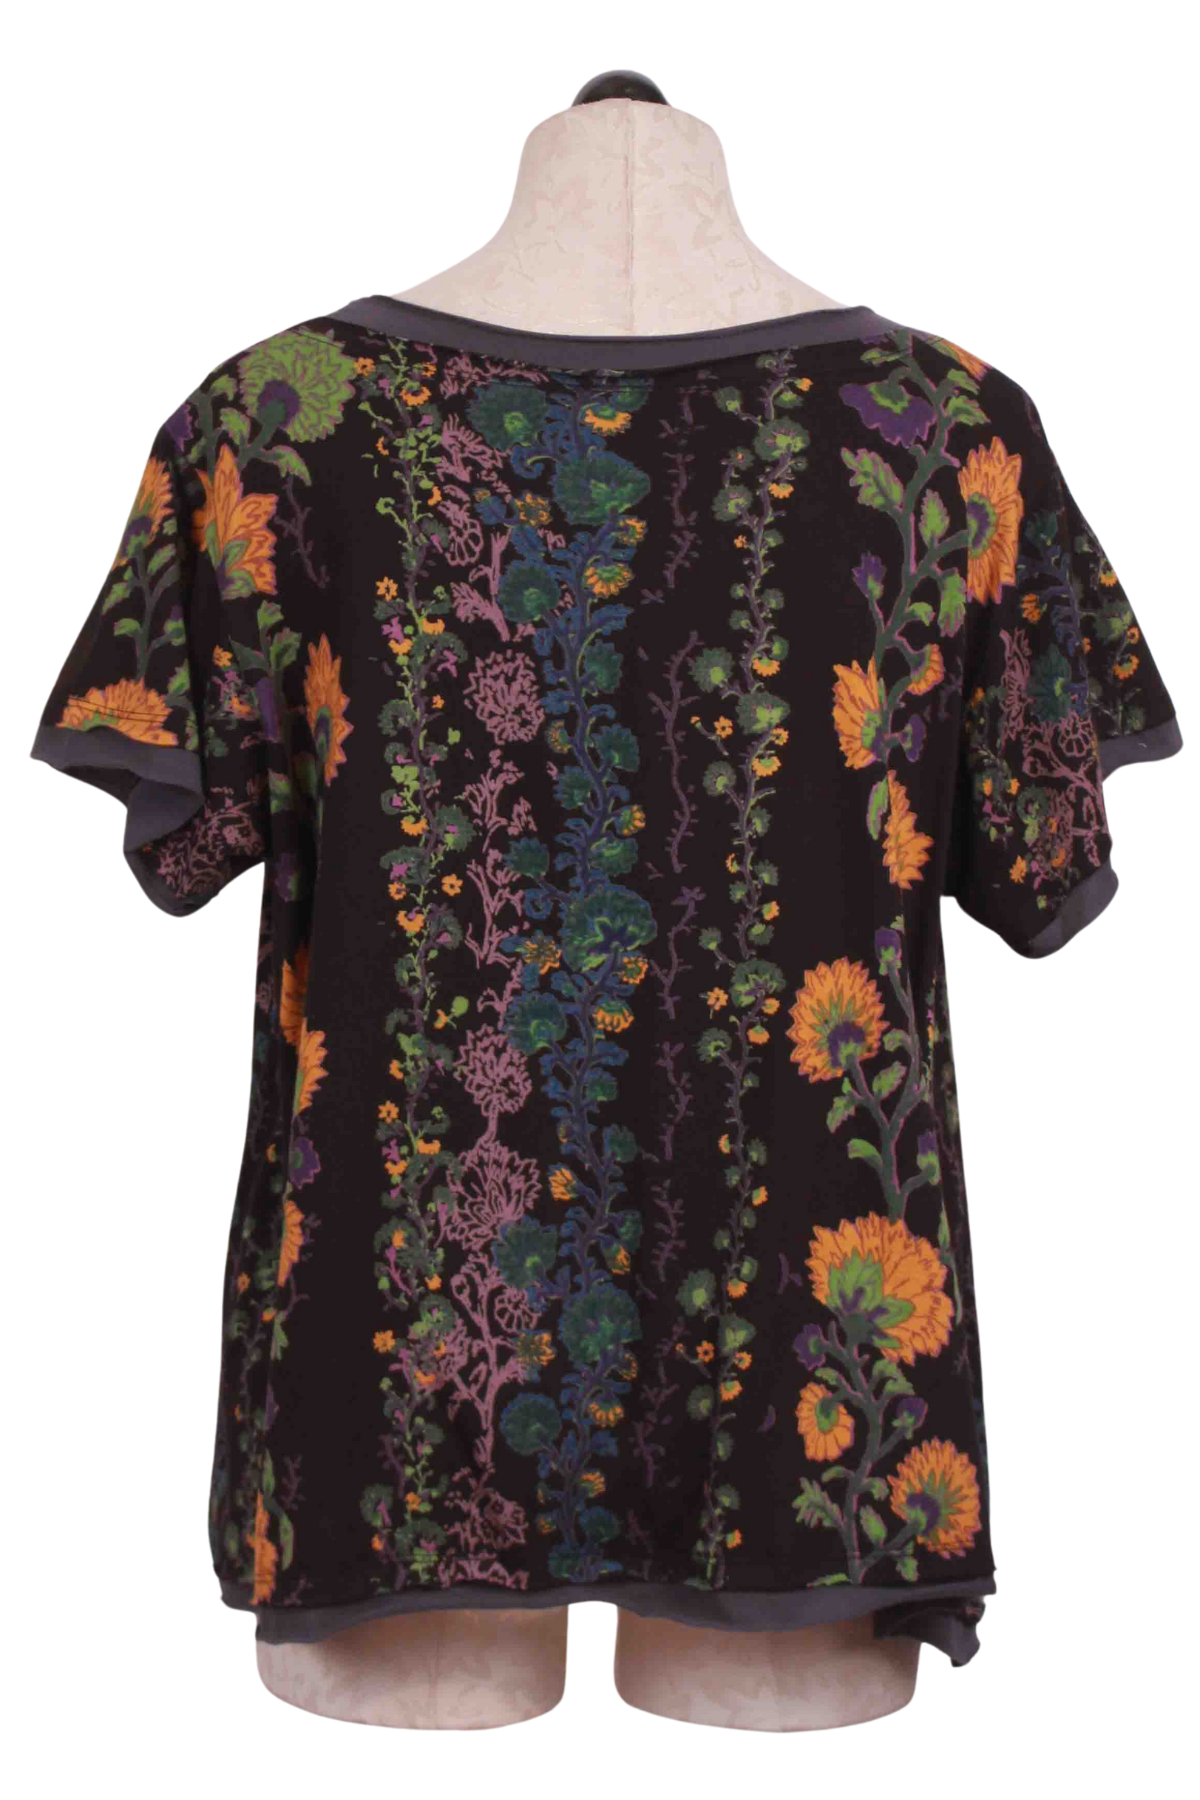 back view of Floral Vine Print Margie Top by Little Journeys